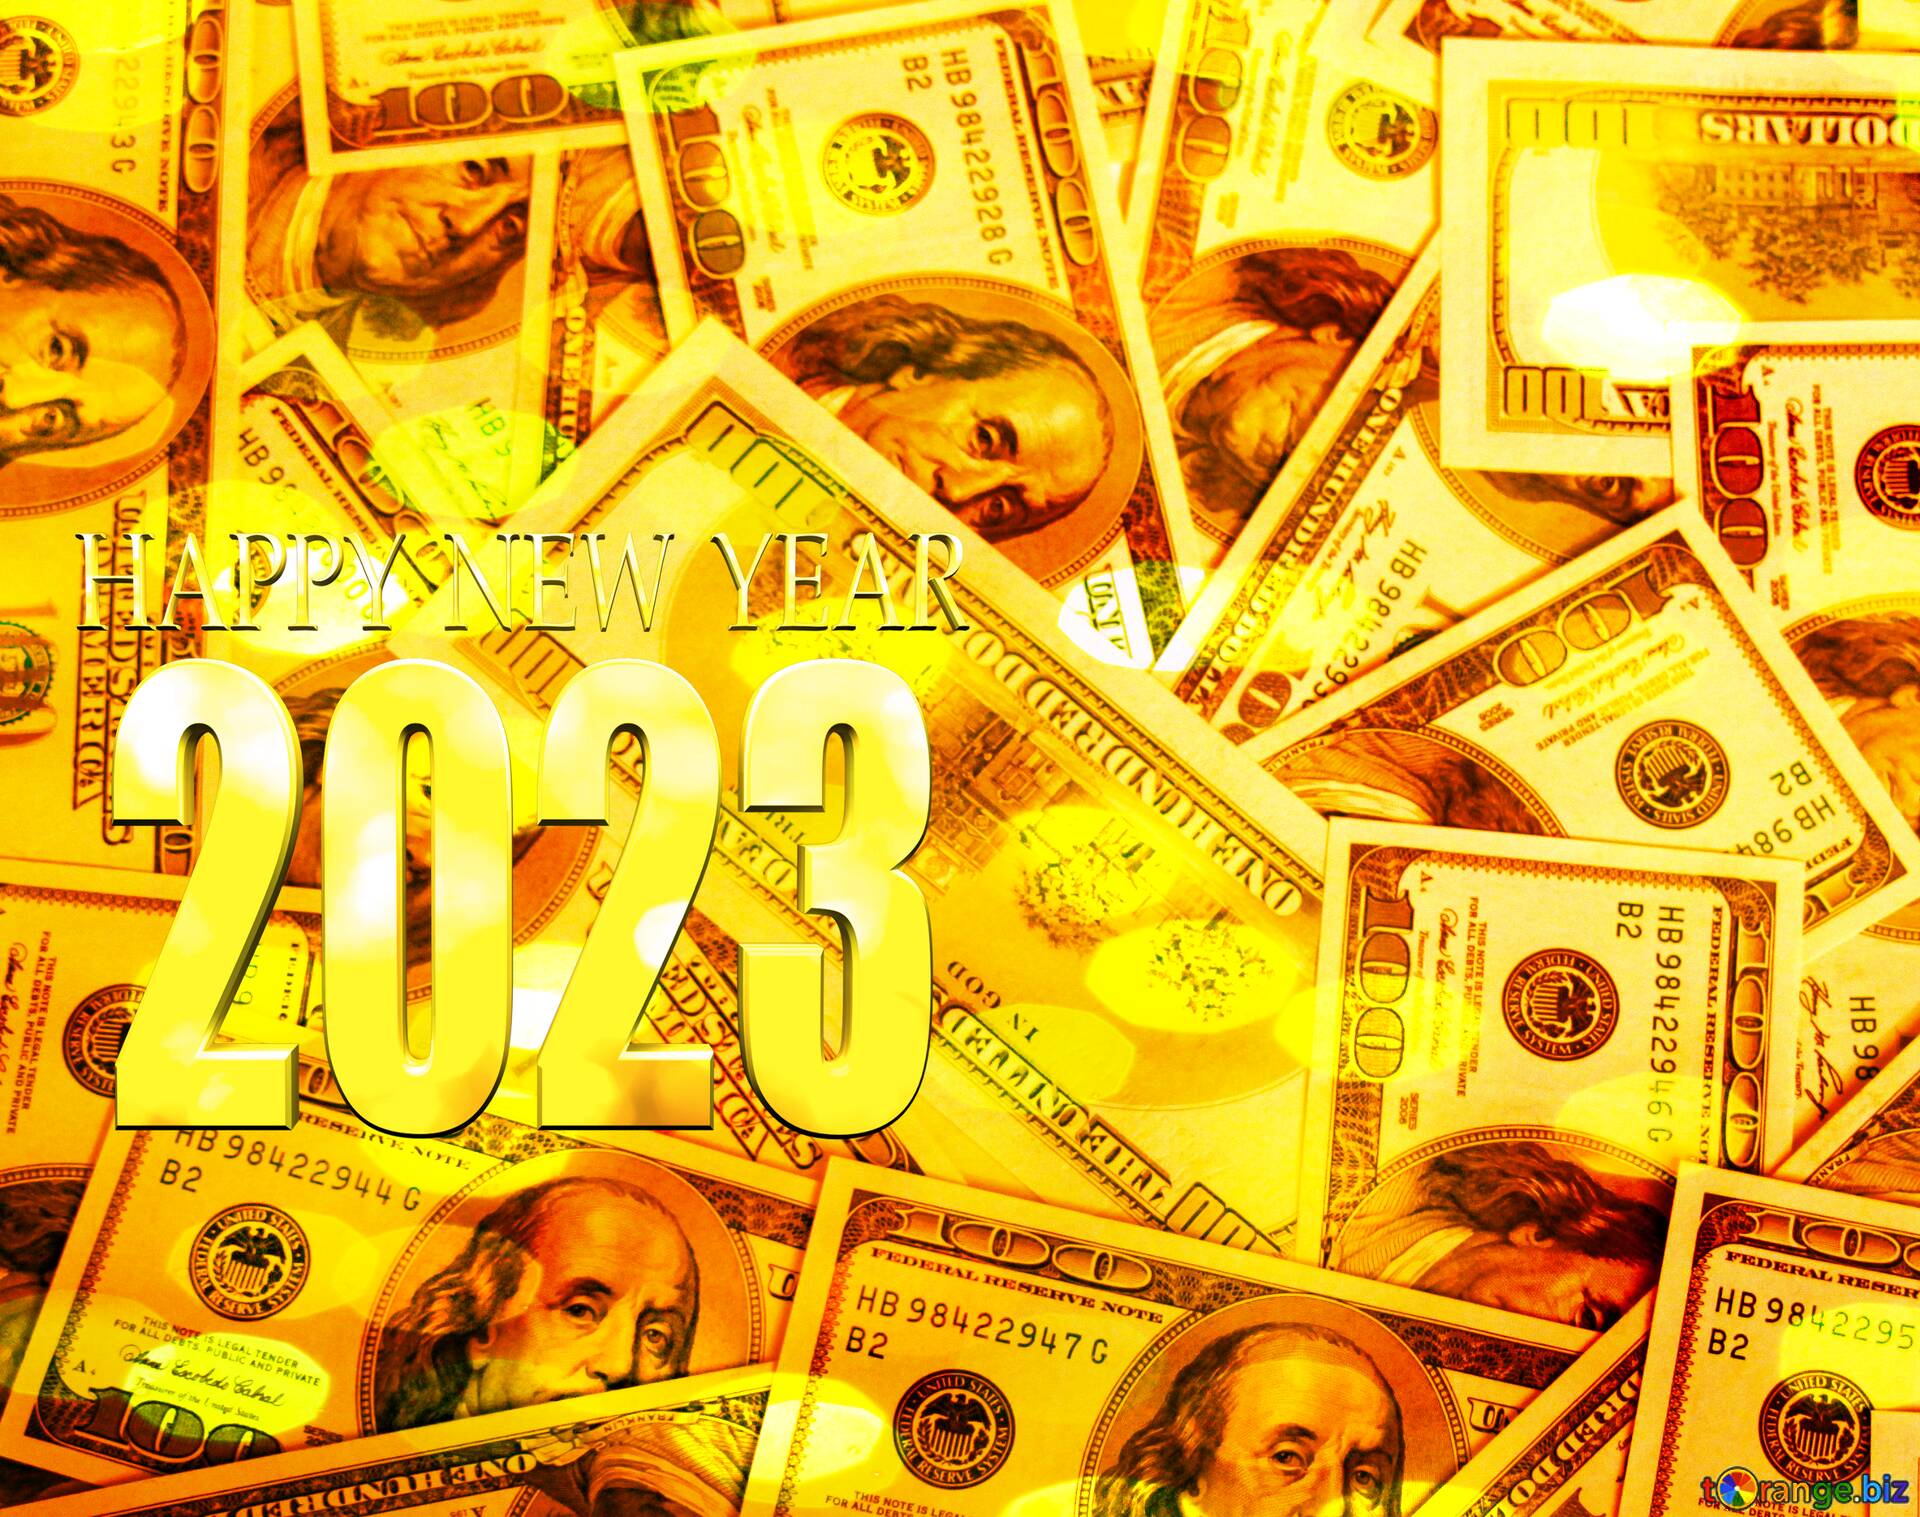 Download free picture Dollars Christmas bokeh background happy new year 2023 on CC-BY License ~ Free Image Stock tOrange.biz ~ fx №208216